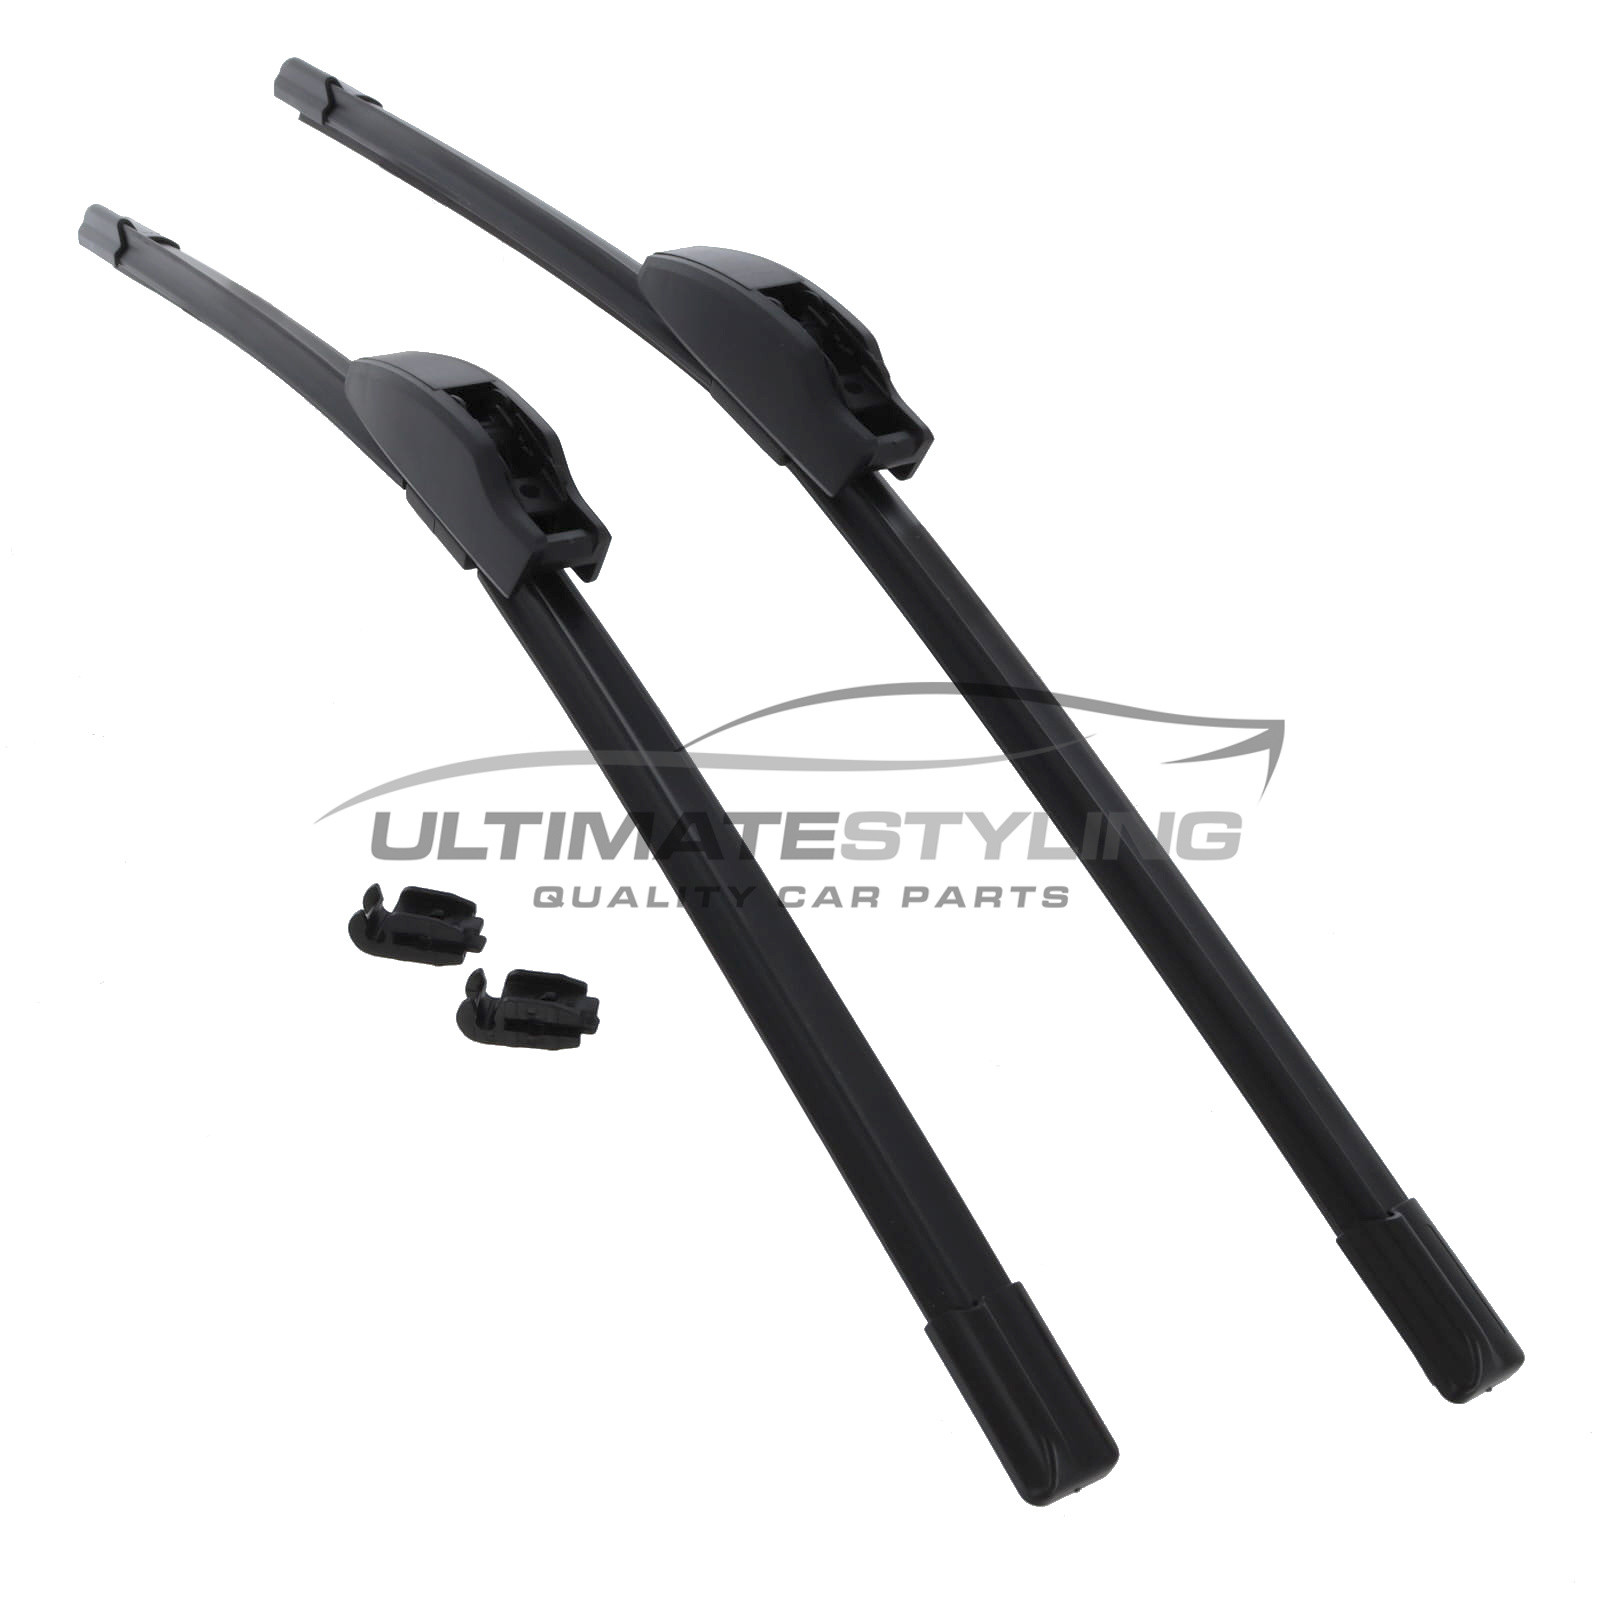 Drivers Side & Passenger Side (Front) Wiper Blades for Mercedes Benz 500 Series